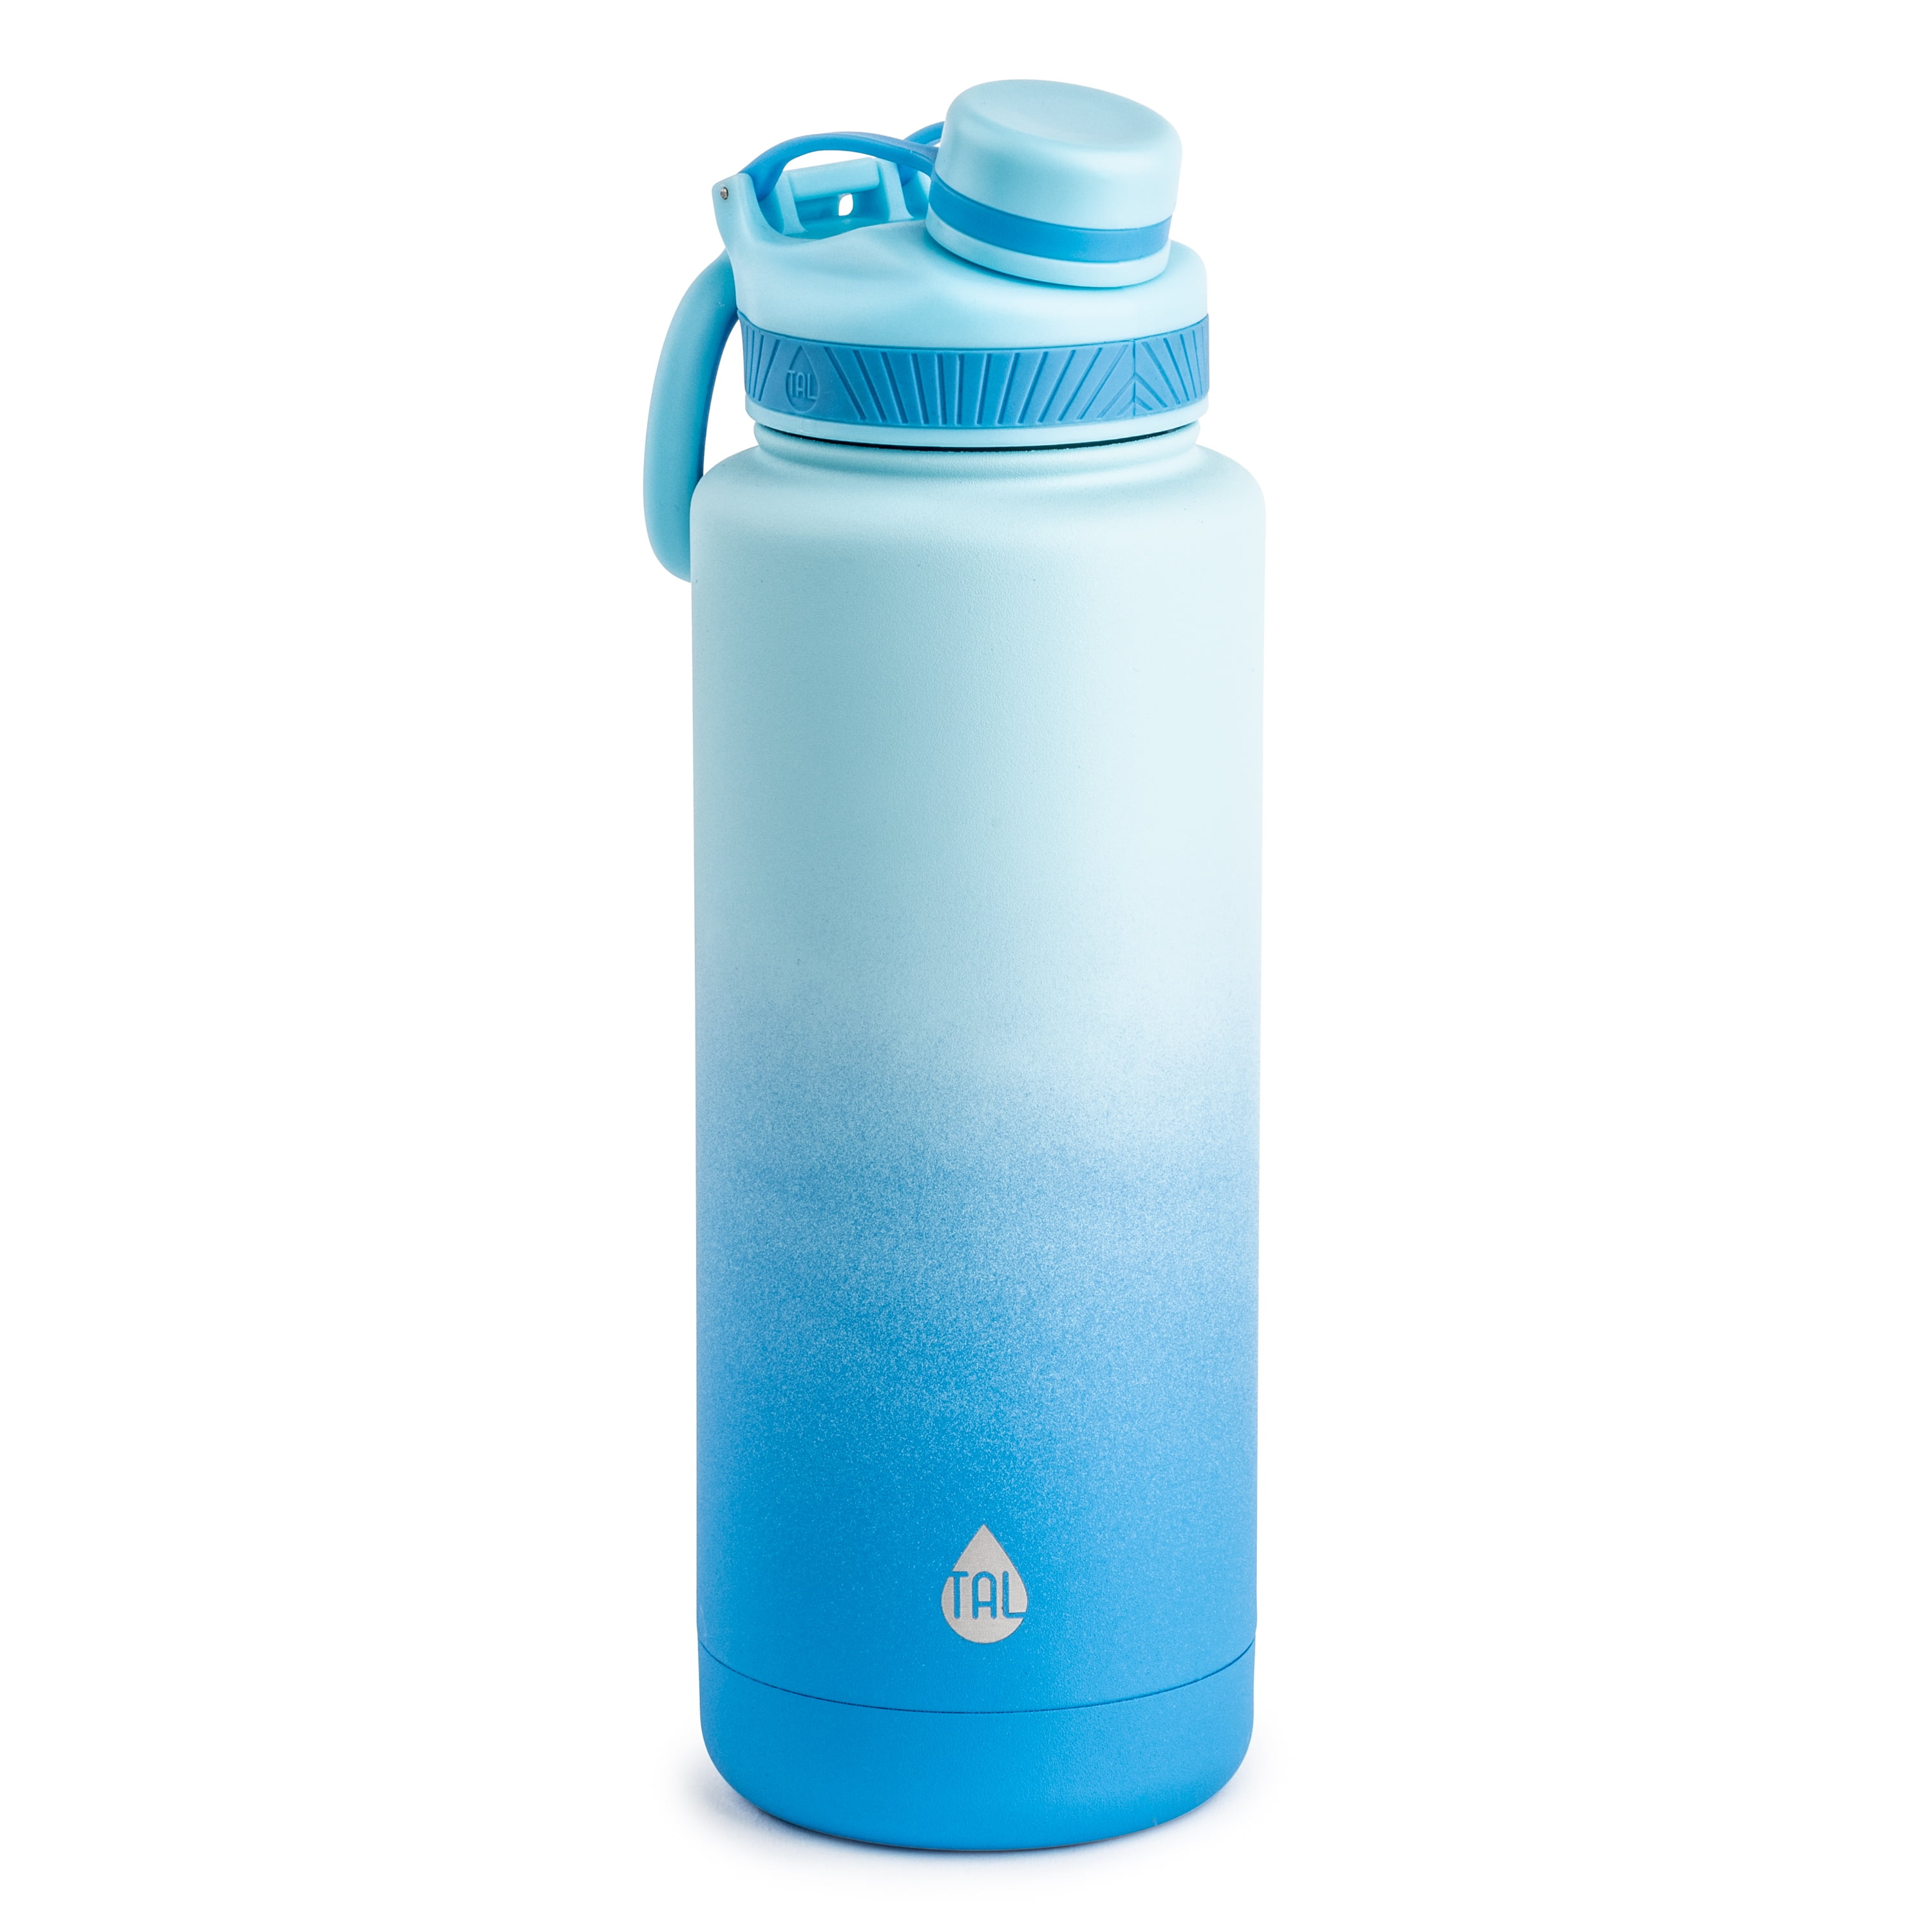 32oz&27oz&20oz Wide Mouth Leak Proof BPA Free& Eco-Friendly Plastic Water Bottle for Outdoor/Running/Camping/Gym Flip Top & Filter 1-Click Open Grsta Best Sports Water Bottle 